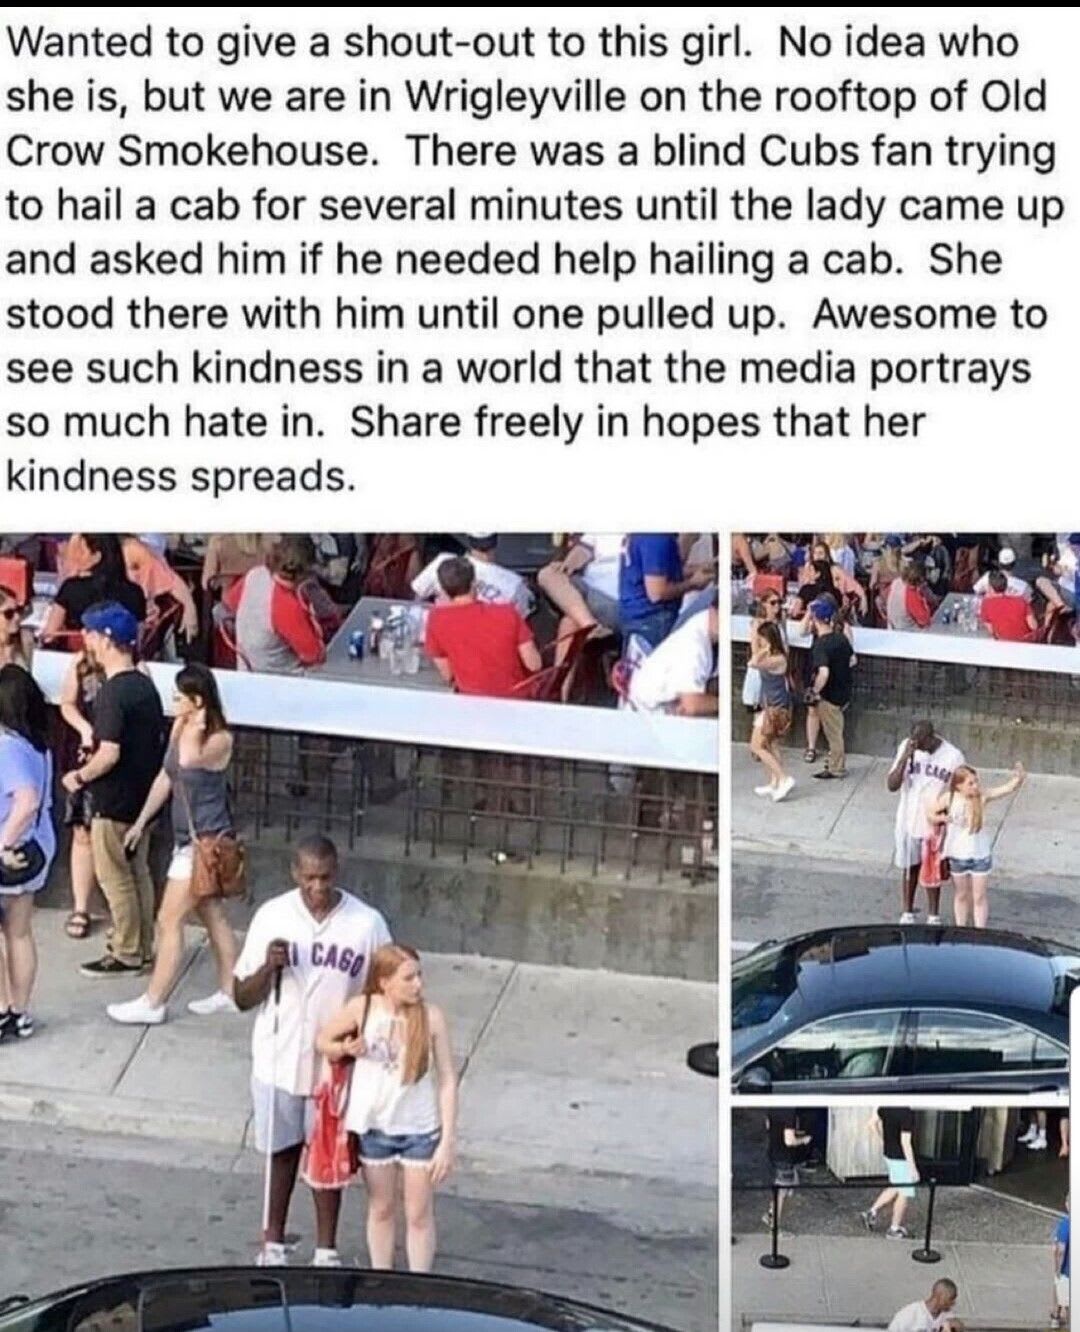 Pin by RubyRedd Ruby on A Love That Knows No Bounds | Humanity restored, Human kindness, Talk to strangers